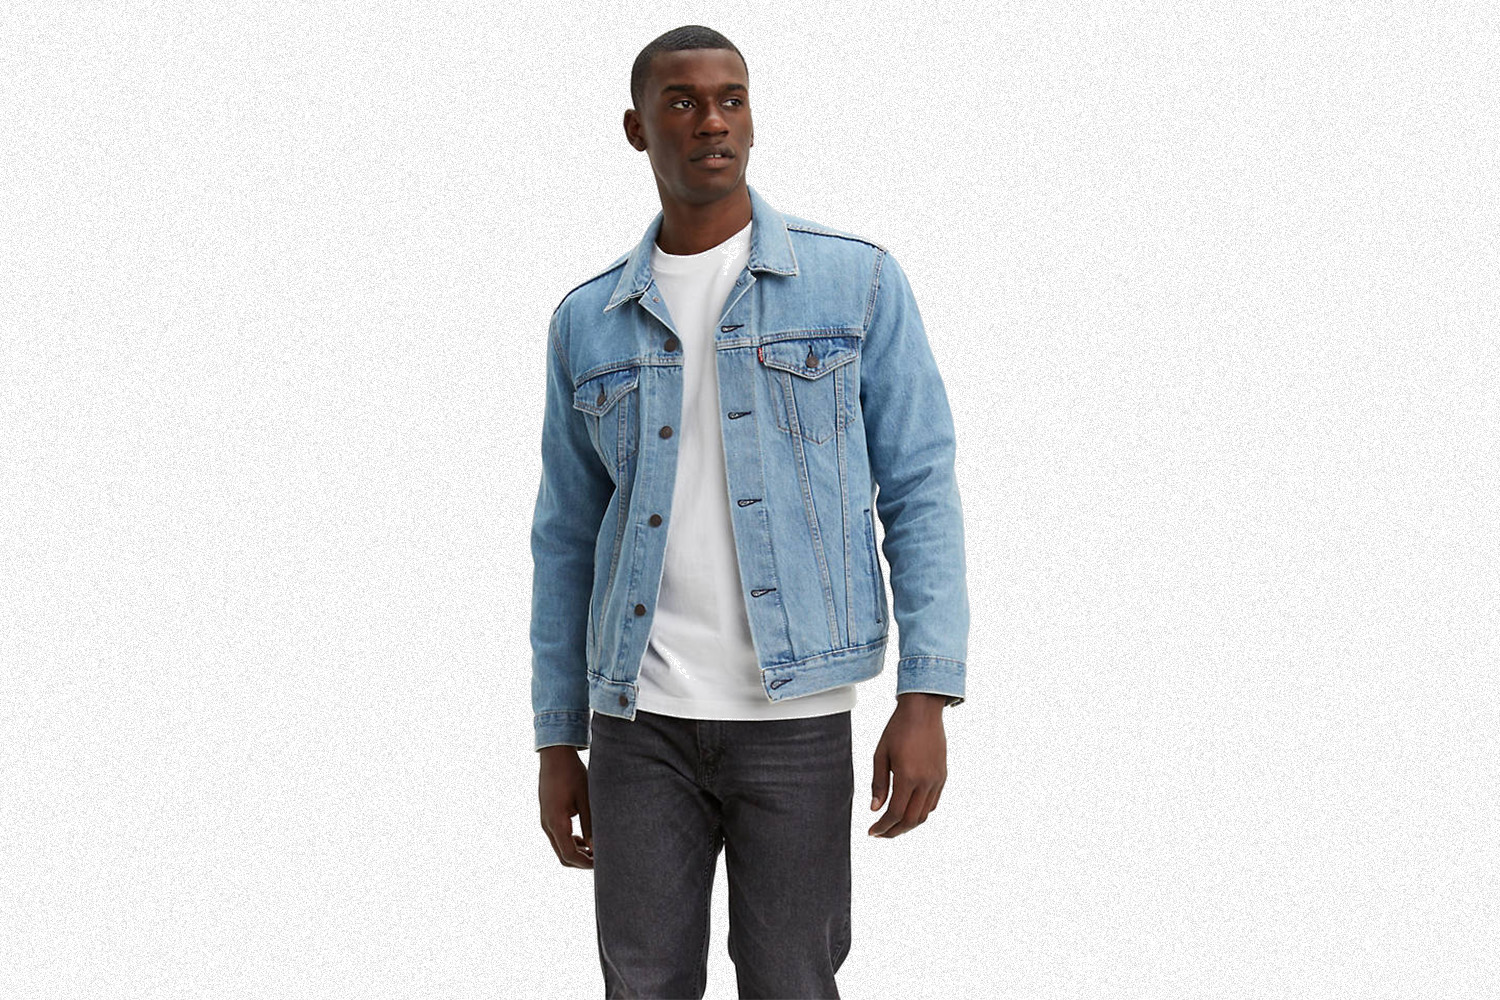 Spend $100 or More at Levi's and Get 30 